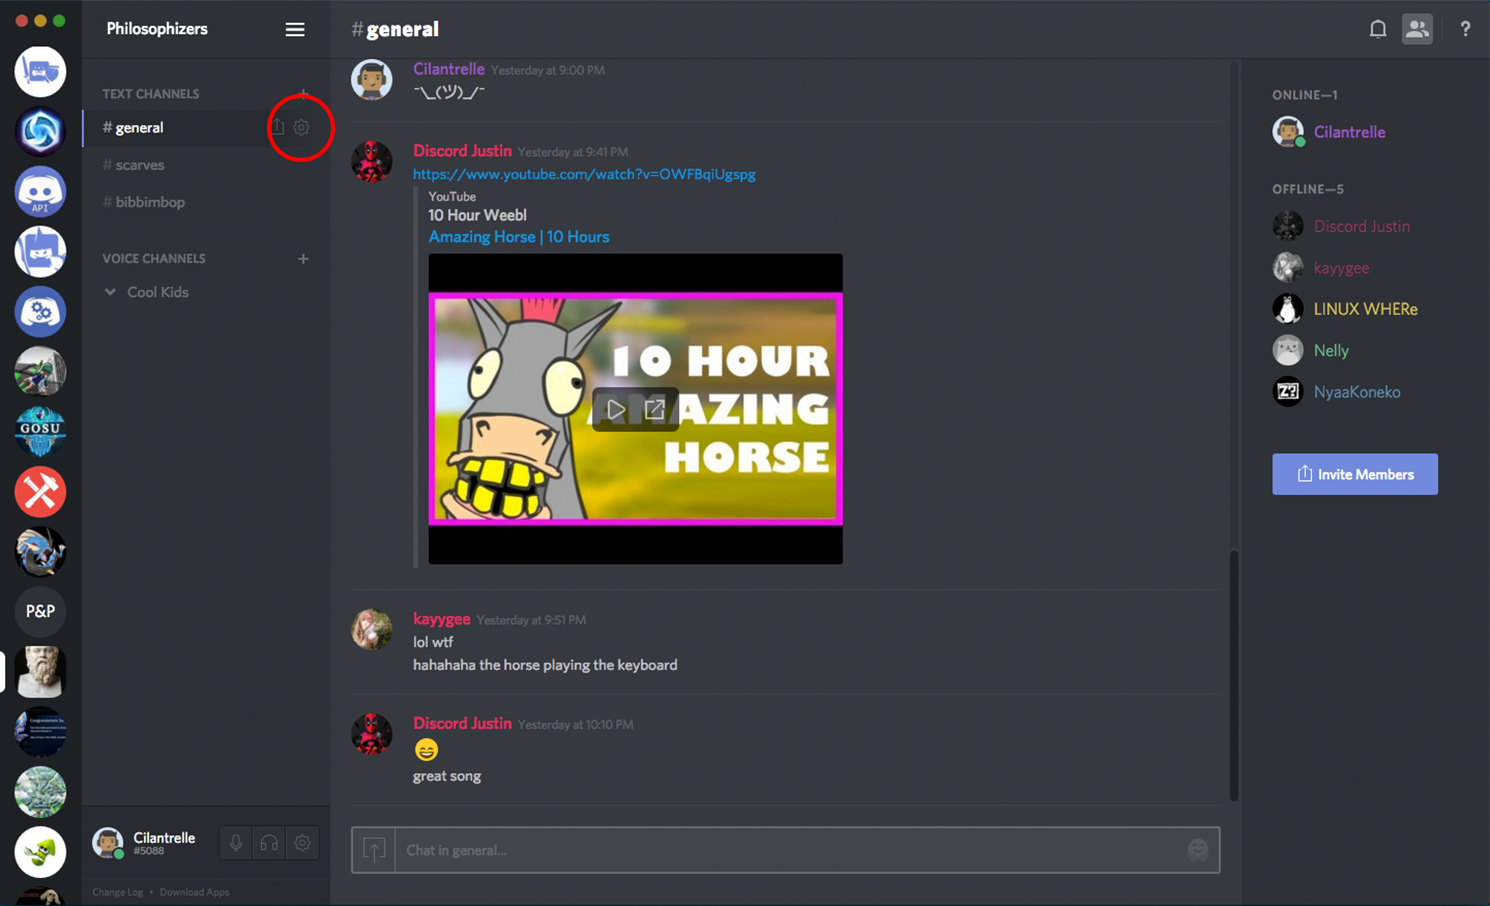 Discord server chat user mute